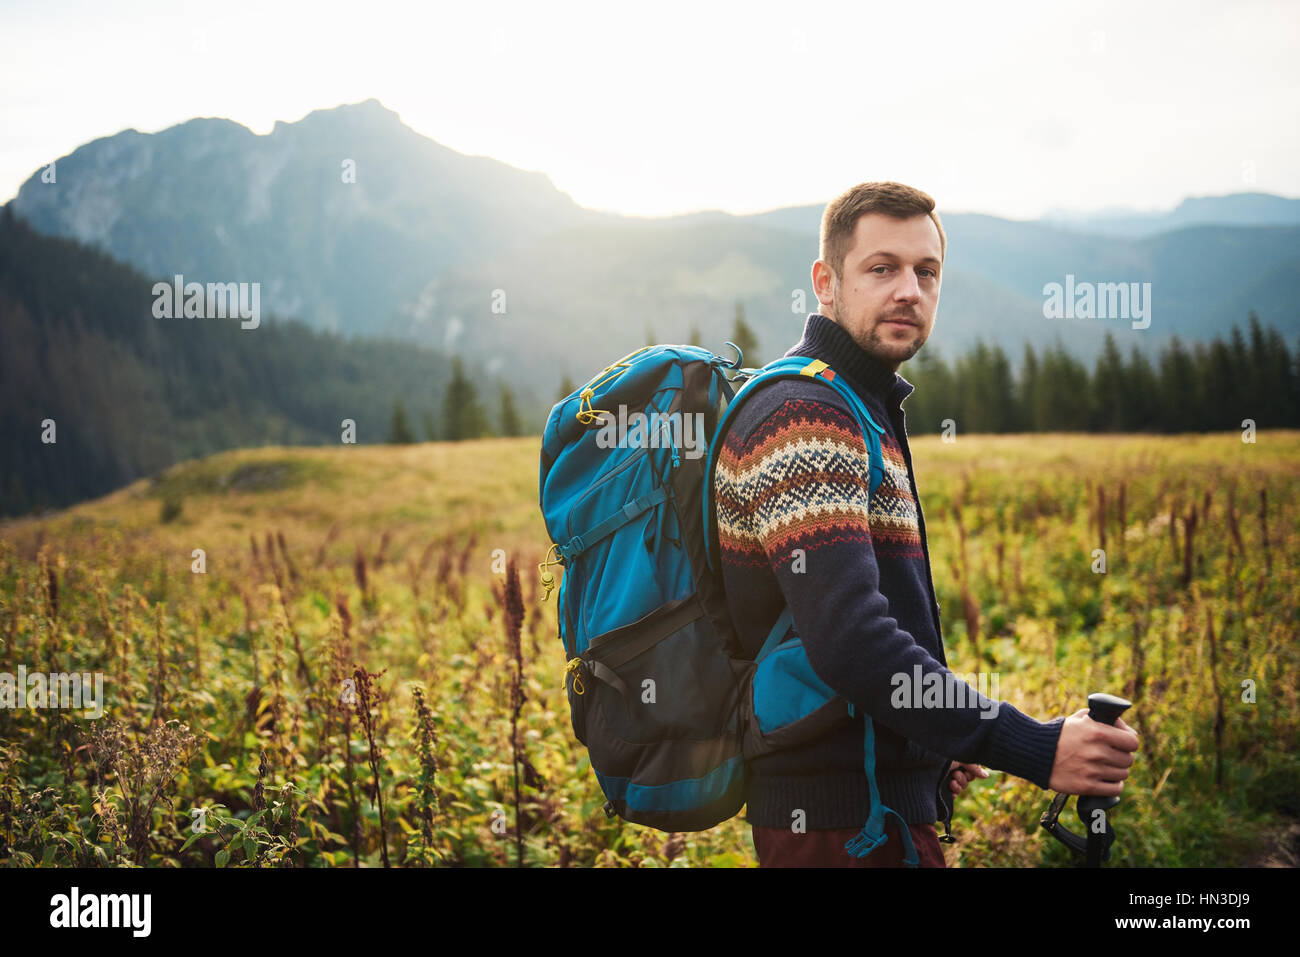 Portrait of a young man wearing a backpack and carrying trekking poles standing in a field while hiking in the wilderness Stock Photo